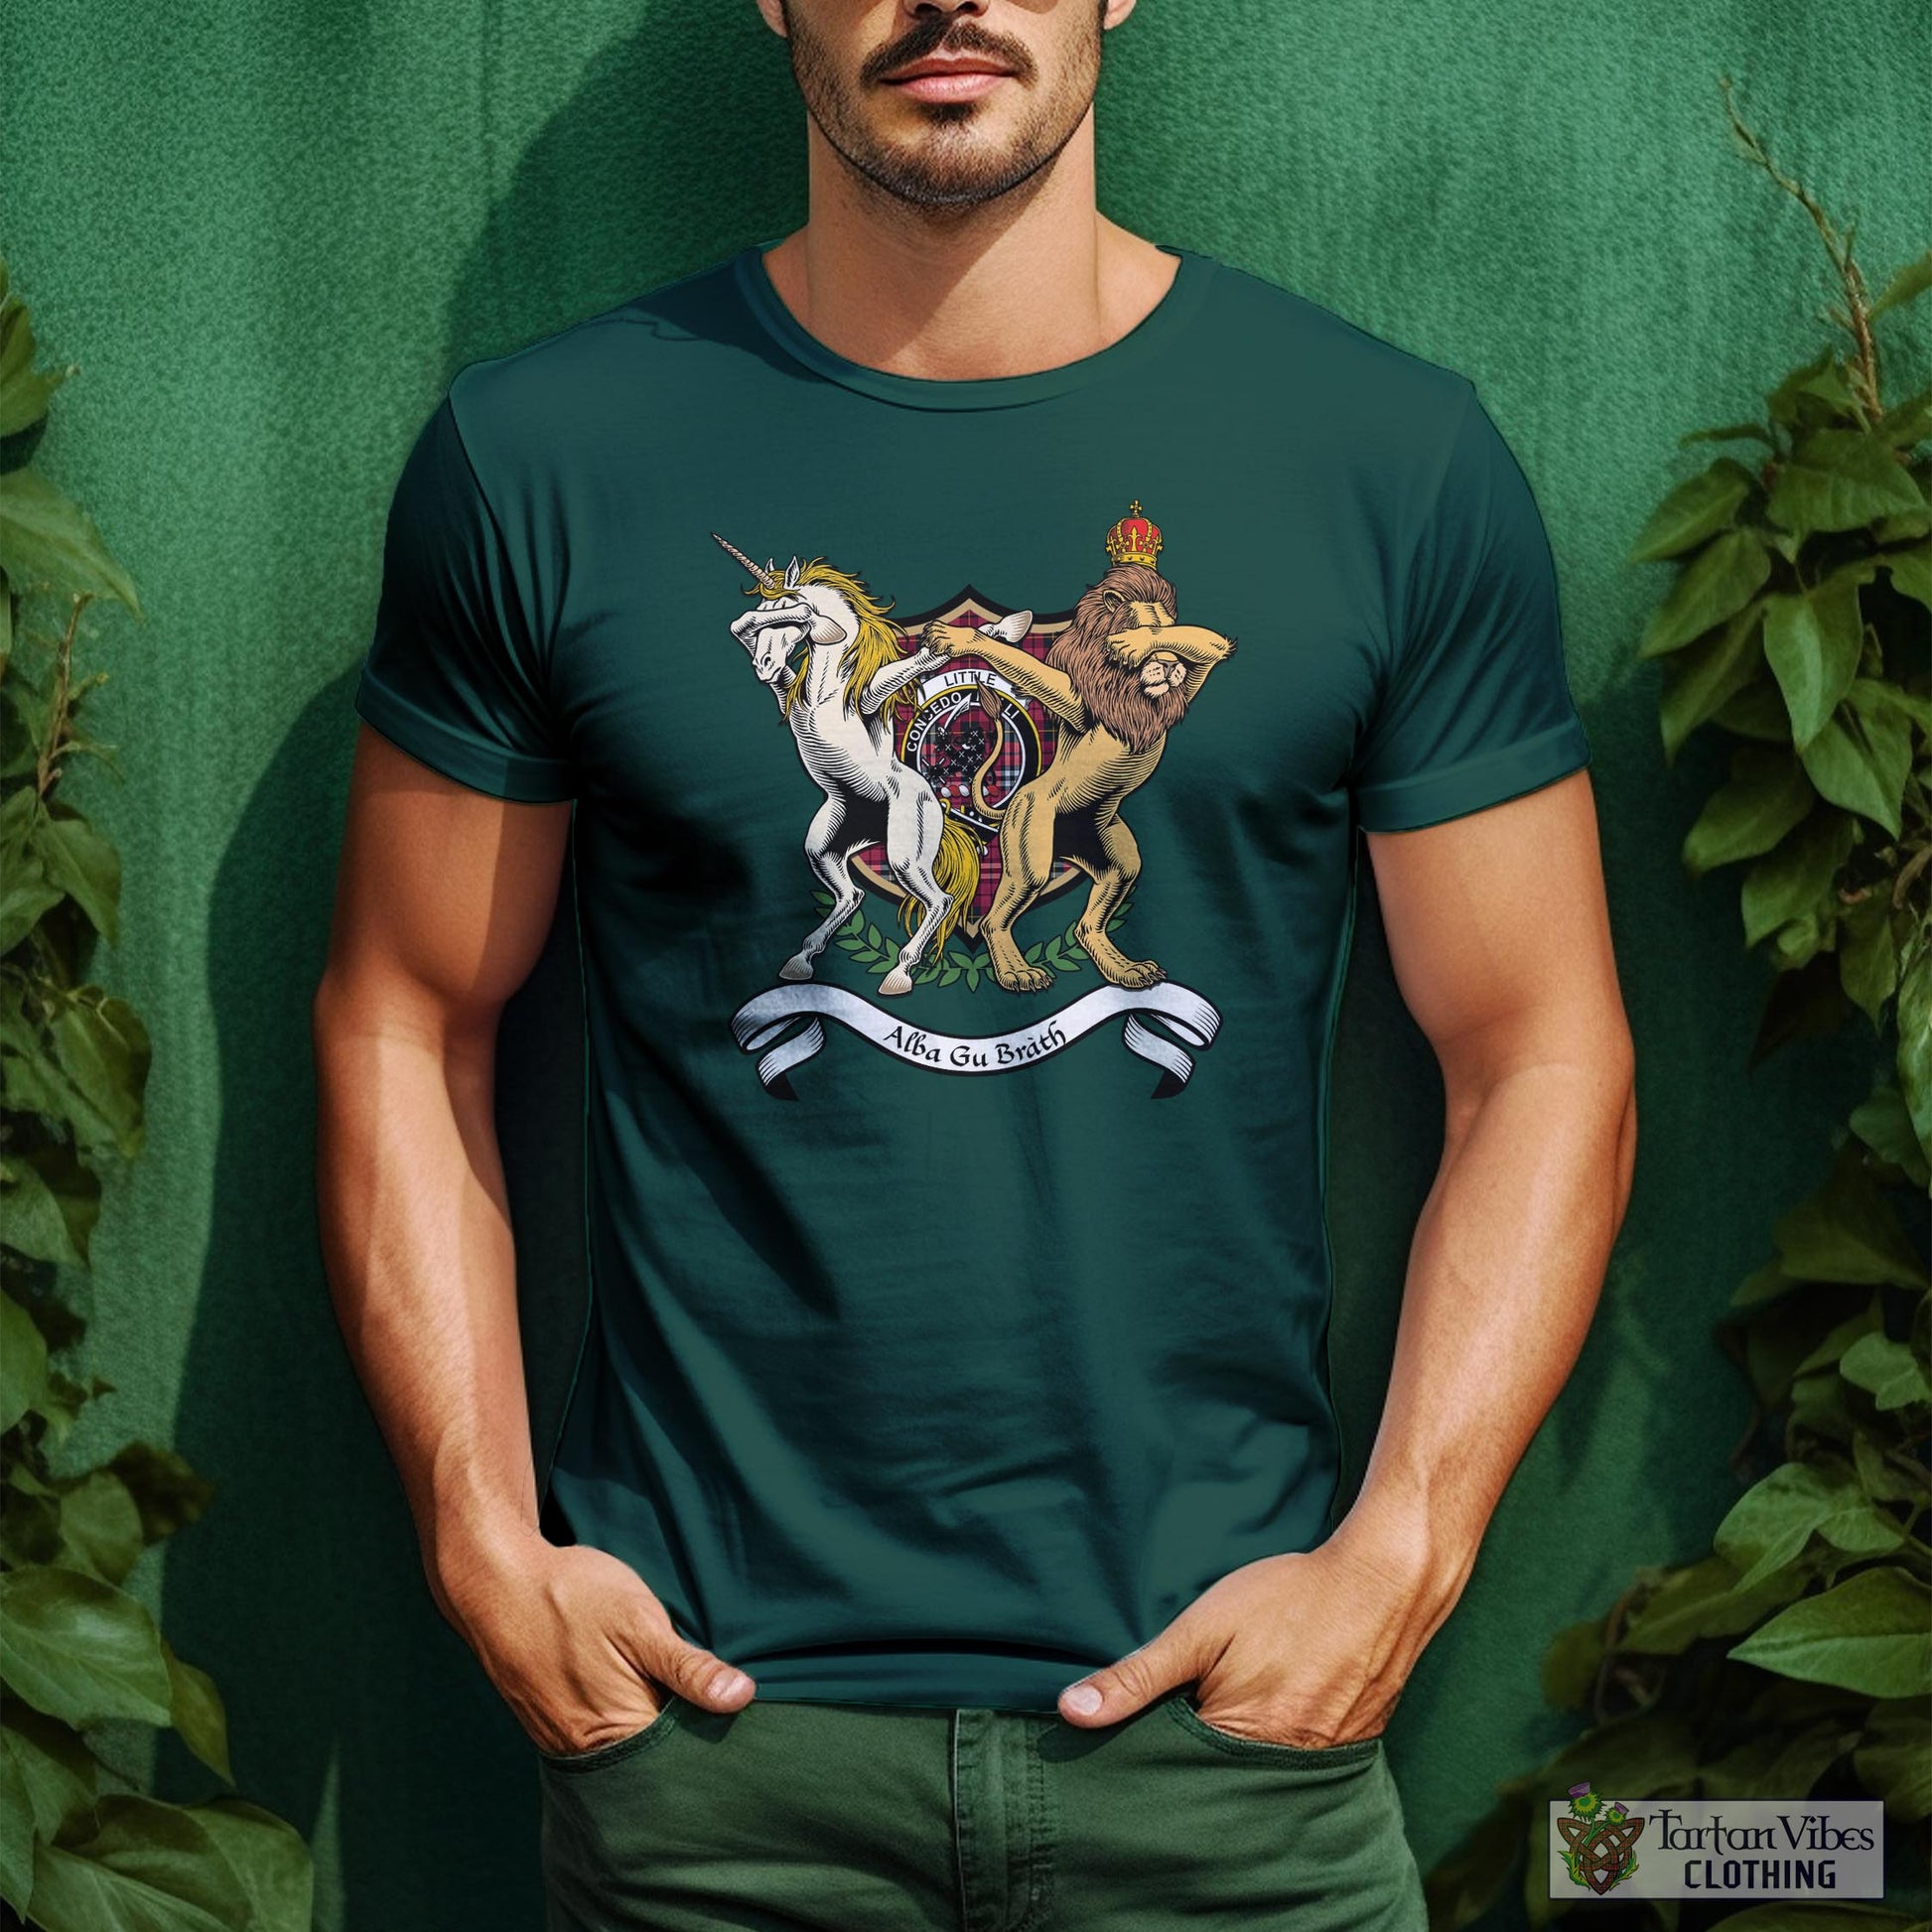 Tartan Vibes Clothing Little Family Crest Cotton Men's T-Shirt with Scotland Royal Coat Of Arm Funny Style